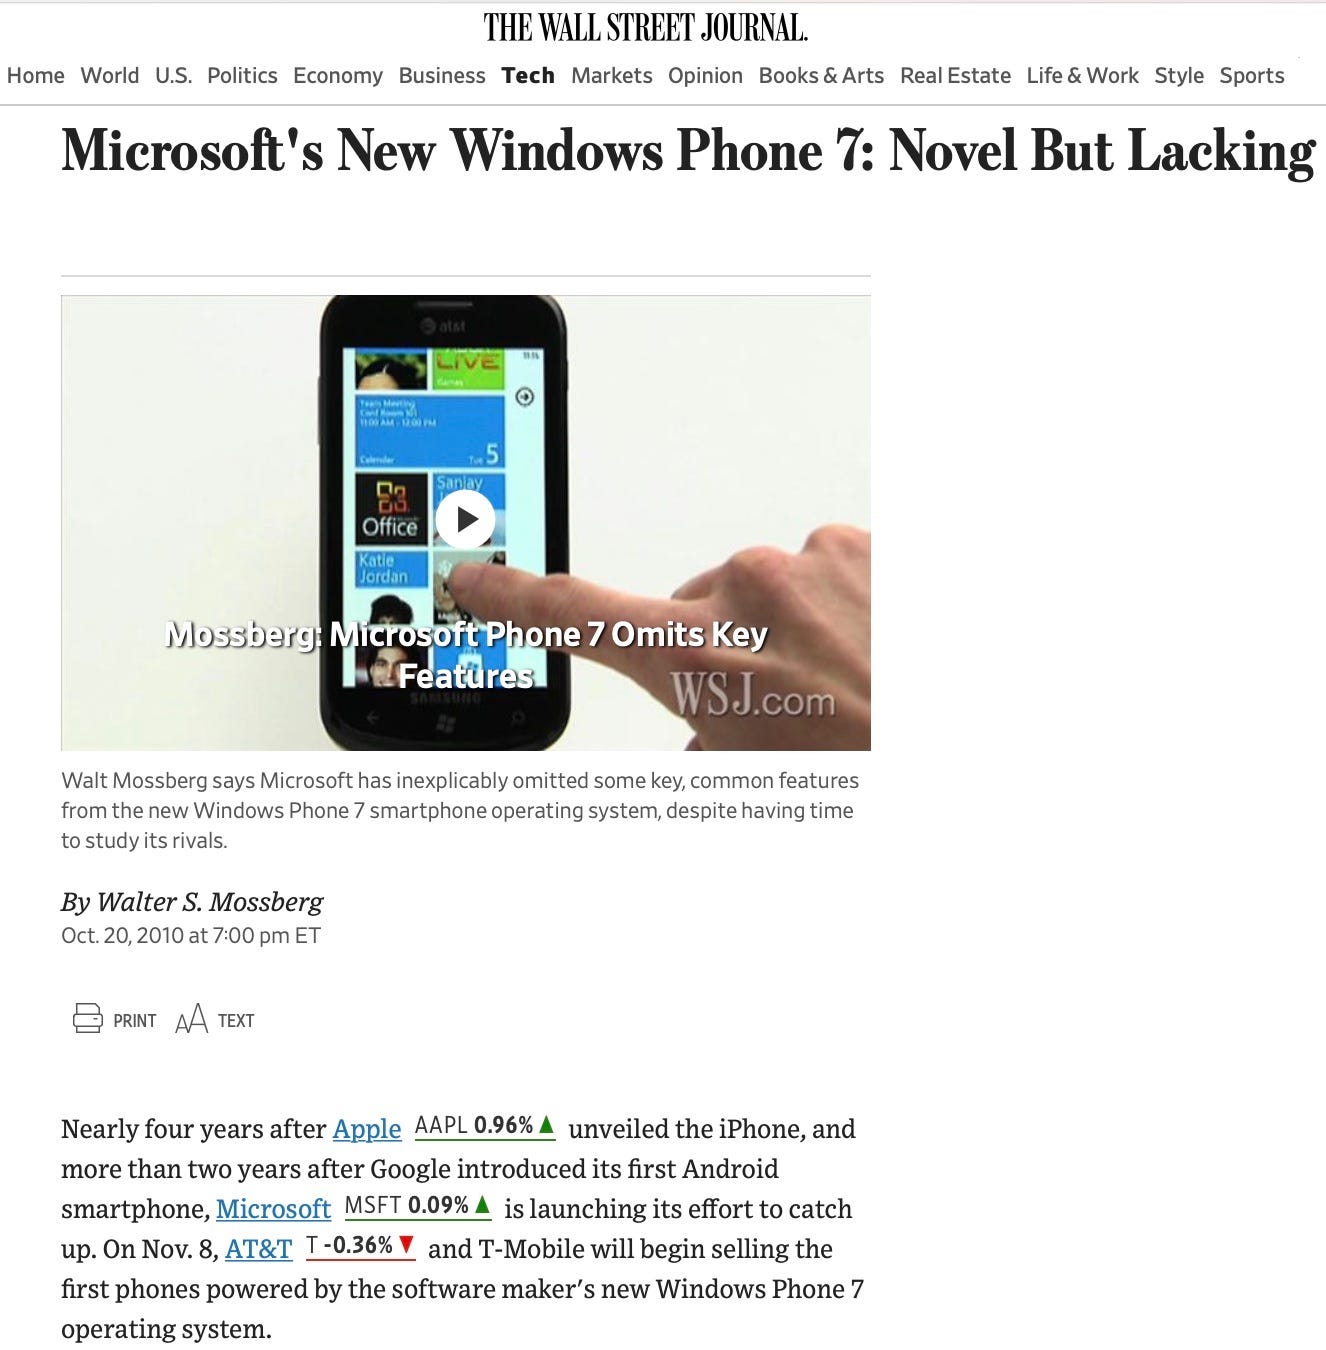 Microsoft's New Windows Phone %: Novel But Lacking LIVE Sanay D Office Katie Jordan Mossberg: Microsoft Phone 7 Omits Key @Feattre WSJ.com Walt Mossberg says Microsoft has inexplicably omitted some key, common features from the new Windows Phone 7 smartphone operating system, despite having time to study its rivals. By Walter S. Mossberg Oct. 20, 2010 at 7:00 pm ET PRINT AA TEXT Nearly four years after Apple AAPL 0.96% A unveiled the iPhone, and more than two years after Google introduced its first Android smartphone, Microsoft MSFT 0.09% A is launching its effort to catch up. On Nov. 8, AT&T I-0.36% Y and T-Mobile will begin selling the first phones powered by the software maker's new Windows Phone 7 operating system.